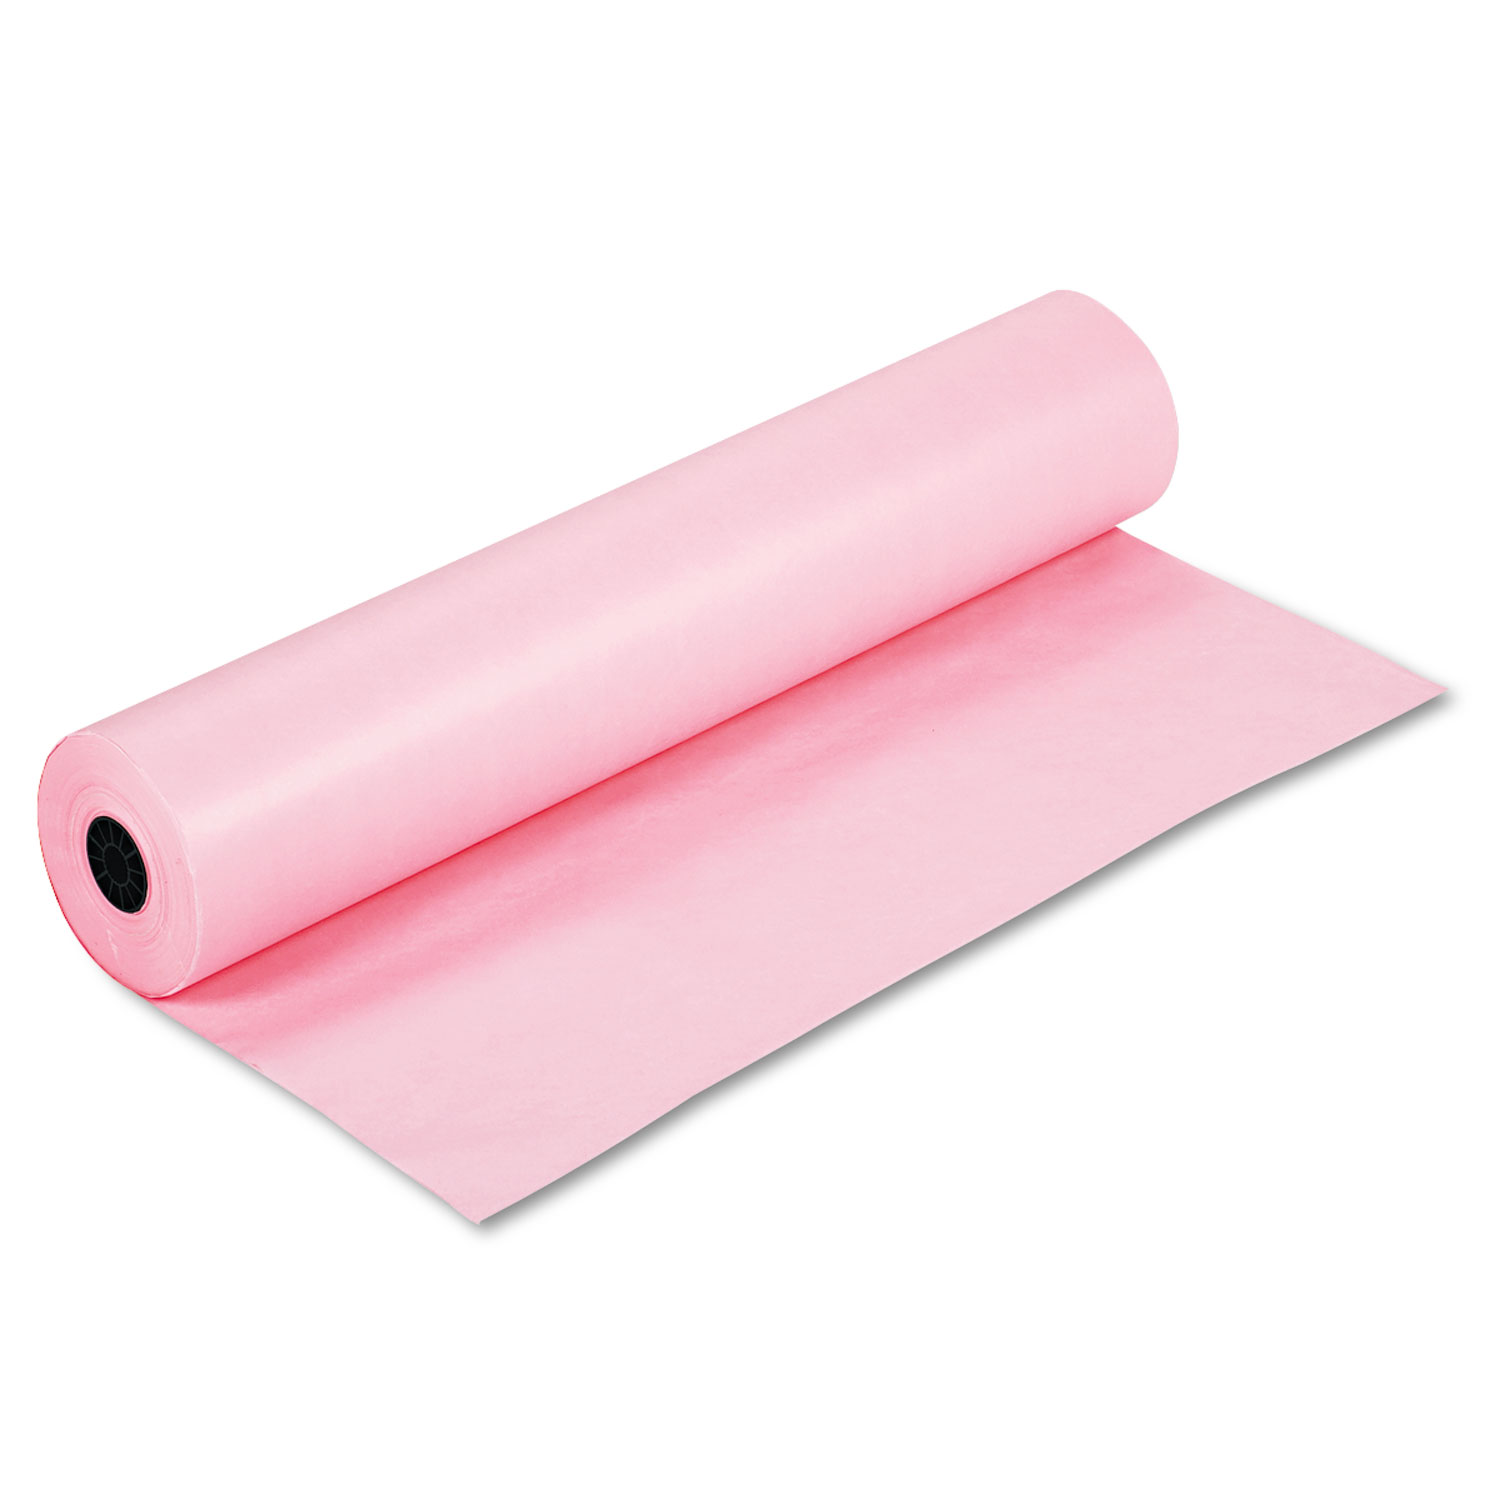  Pacon 63260 Rainbow Duo-Finish Colored Kraft Paper, 35lb, 36 x 1000ft, Pink (PAC63260) 